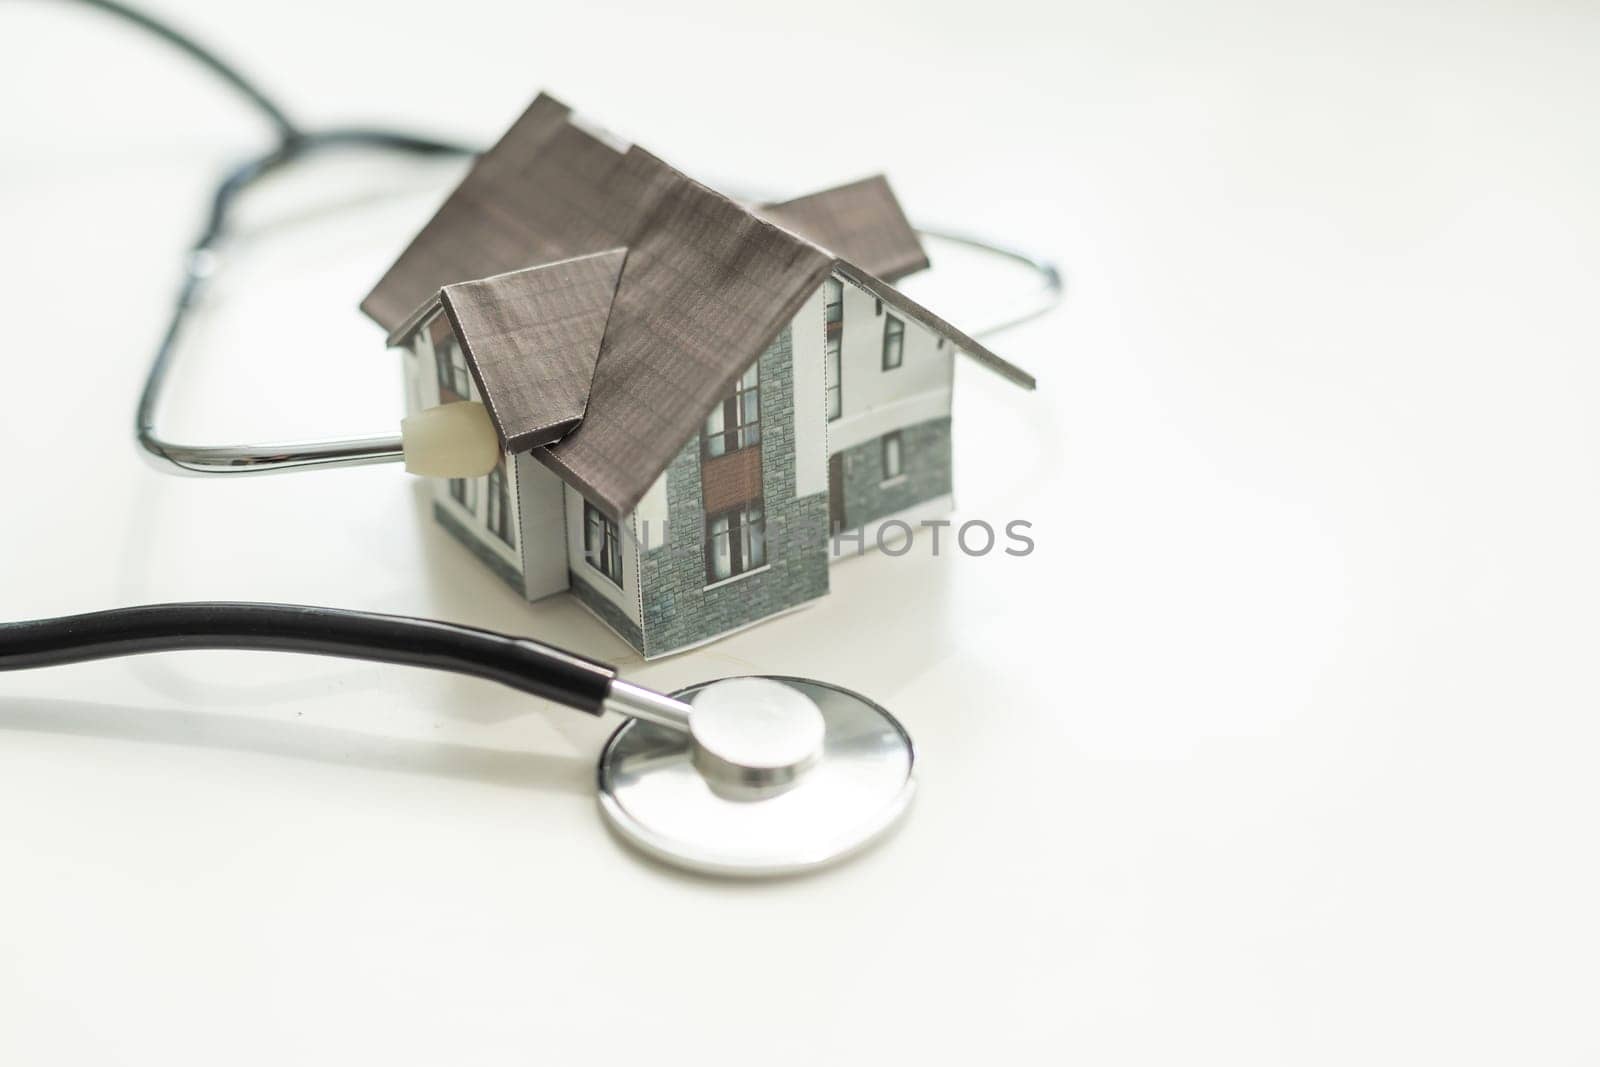 House and Stethoscope isolated on white background by Andelov13